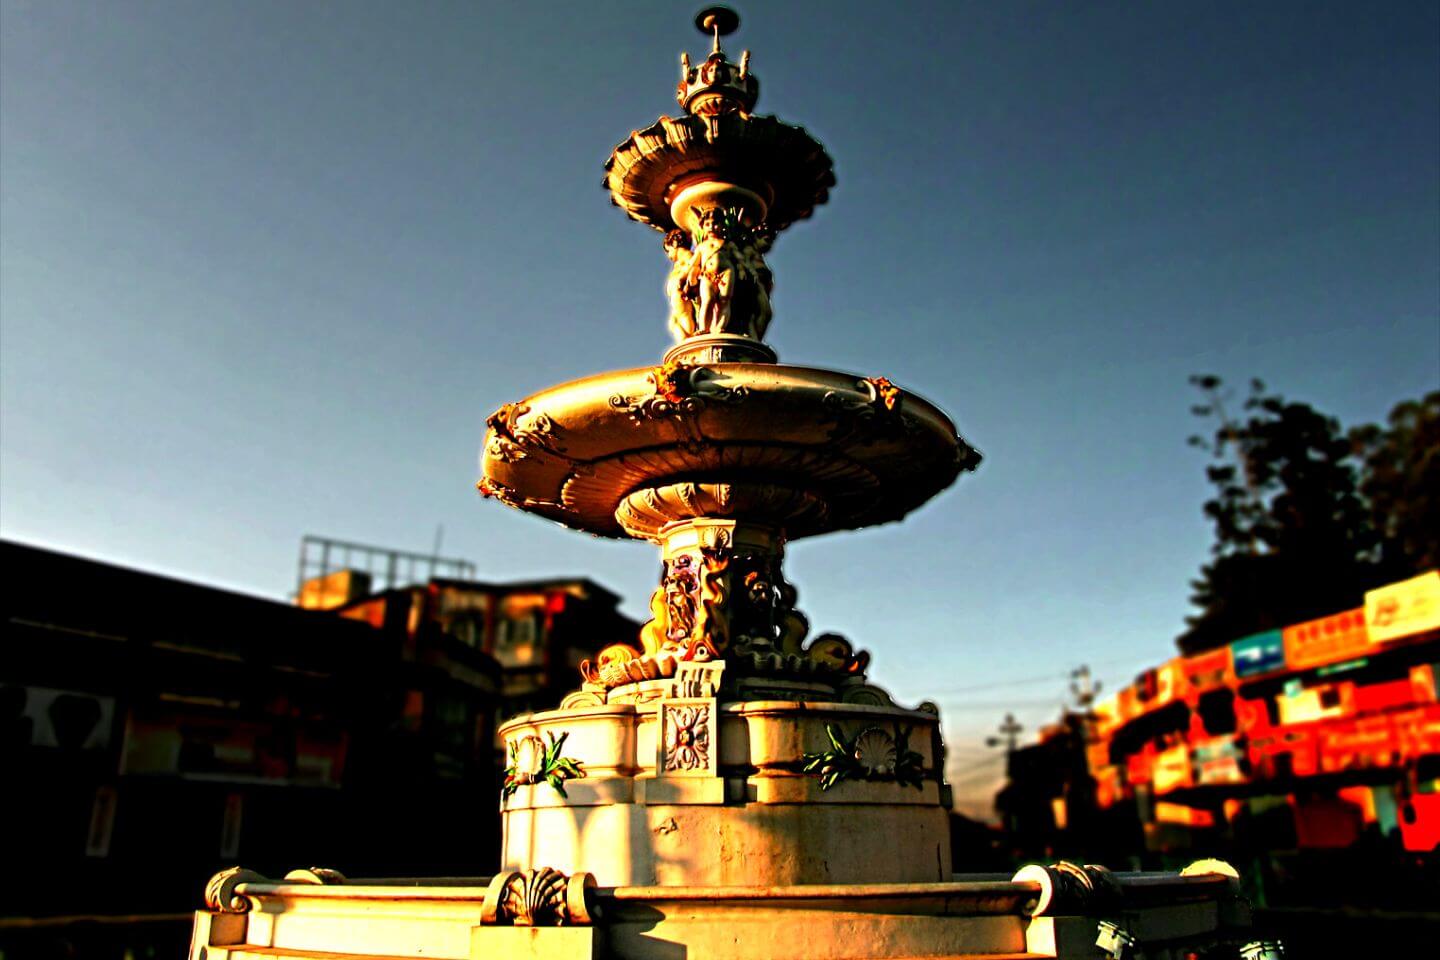 Adam’s Fountain Ooty (Entry Fee, Timings, Entry Ticket Cost, Price)